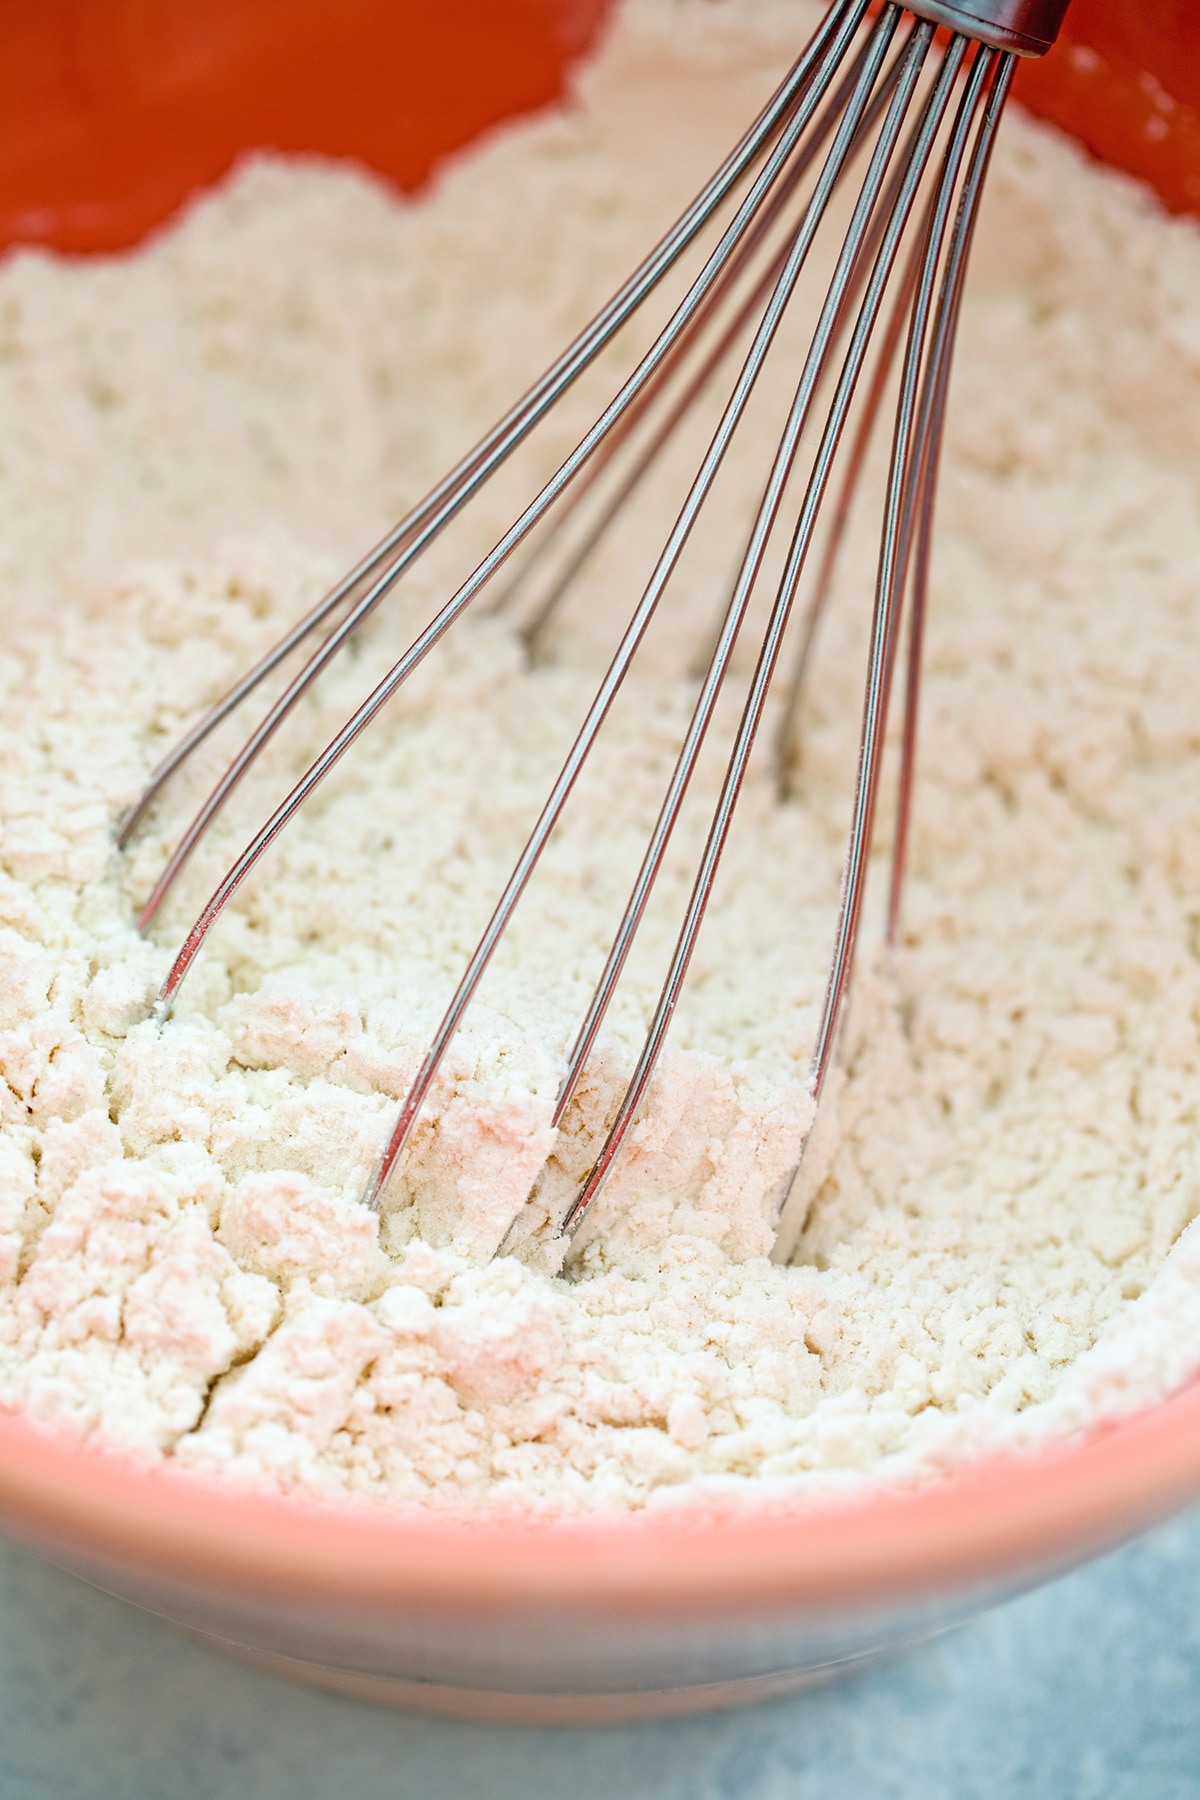 Flour mixture being whisked together in bowl.